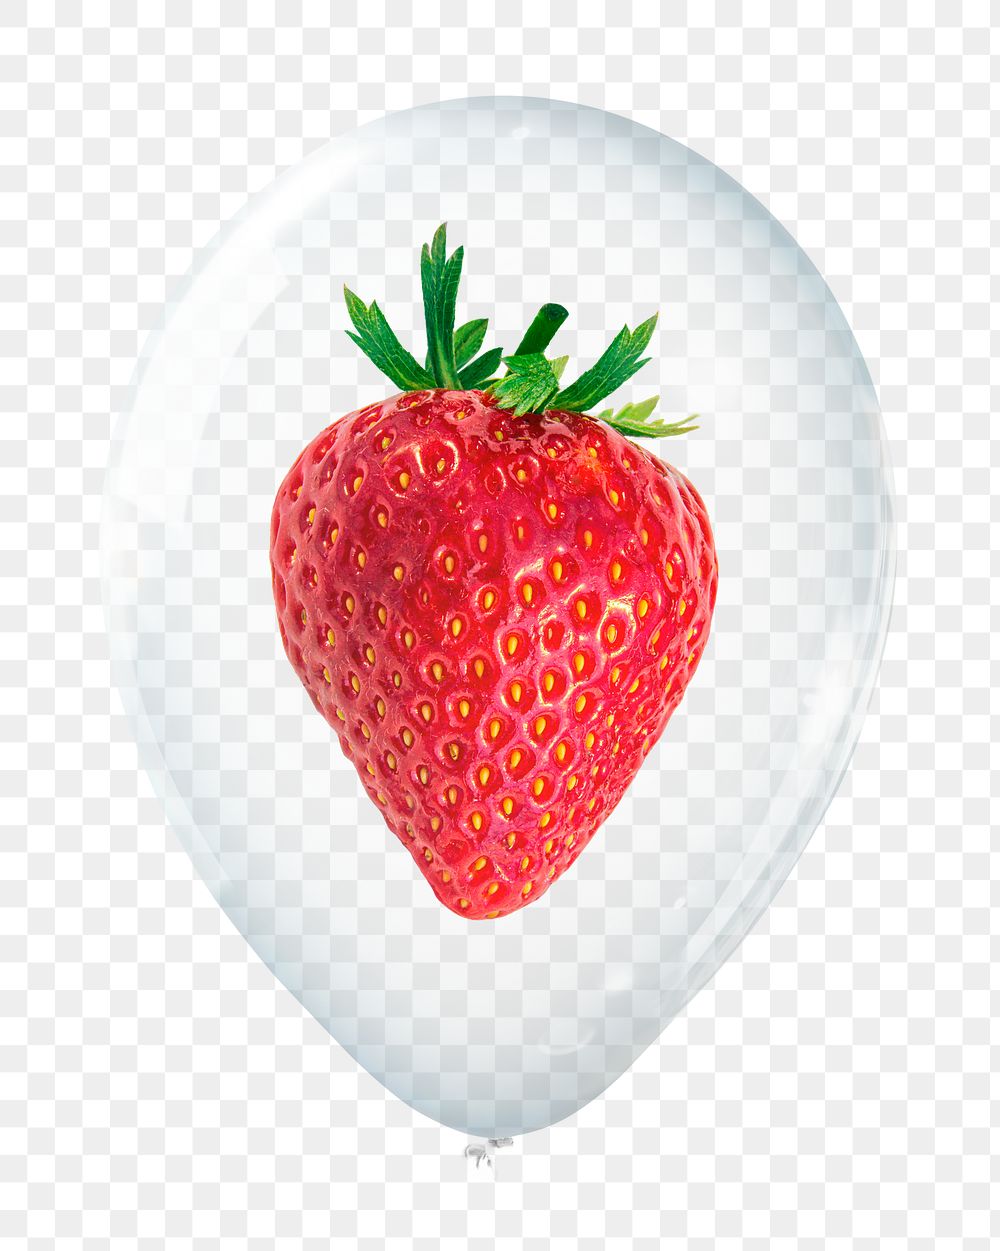 Strawberry png sticker, food in clear balloon, collage element, transparent background